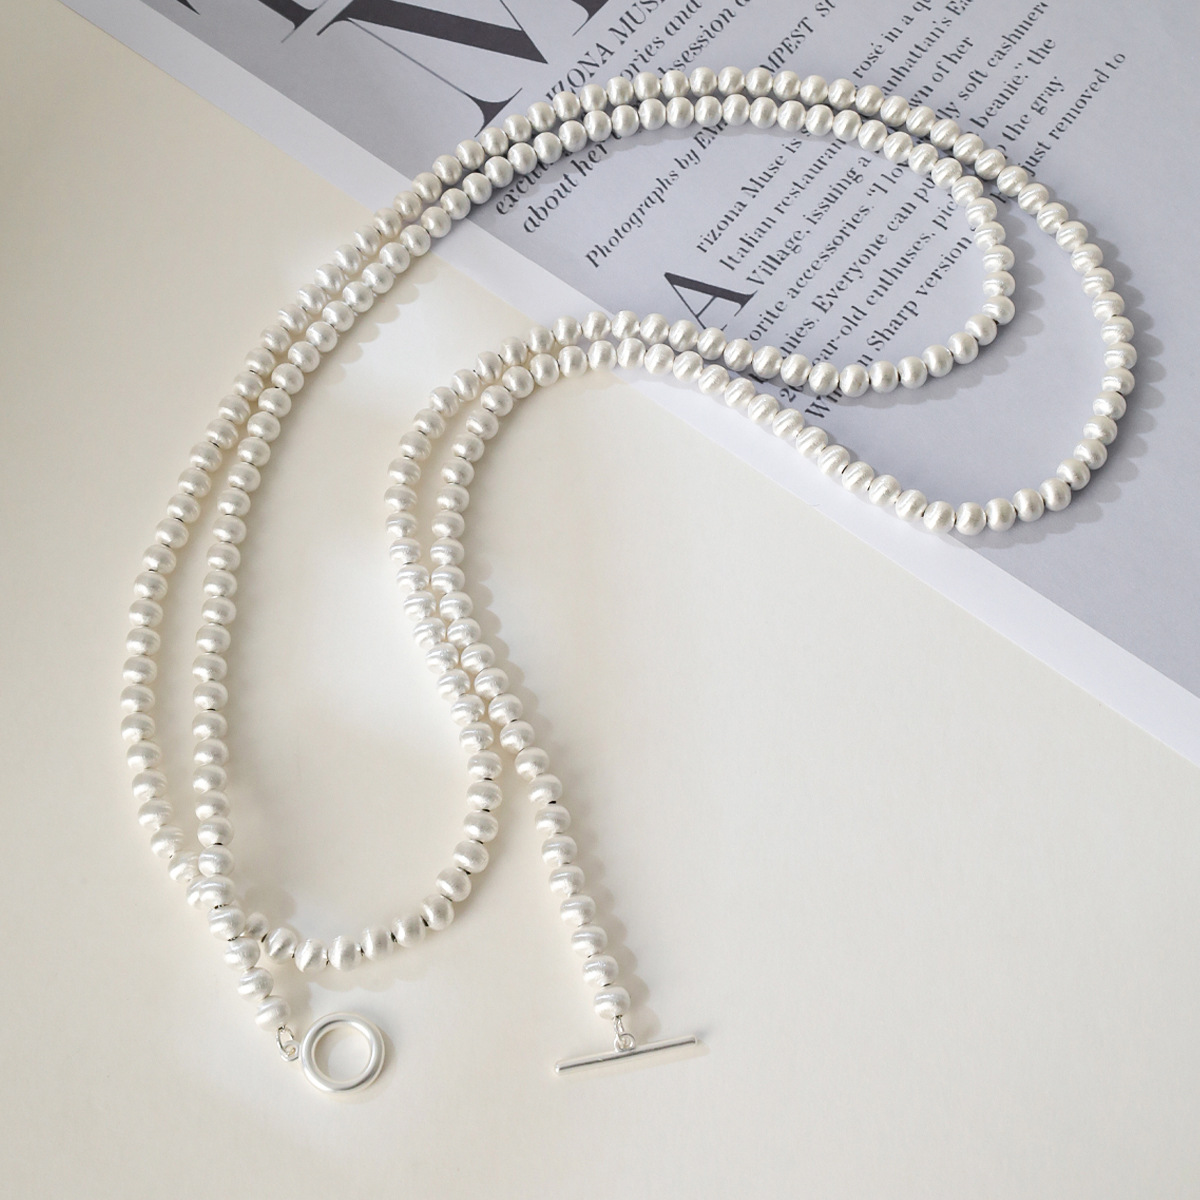 New Heavy Industry Brushed Series Beaded Necklace Light Luxury Niche Design High-end Fashion All-match Elegant Clavicle Chain